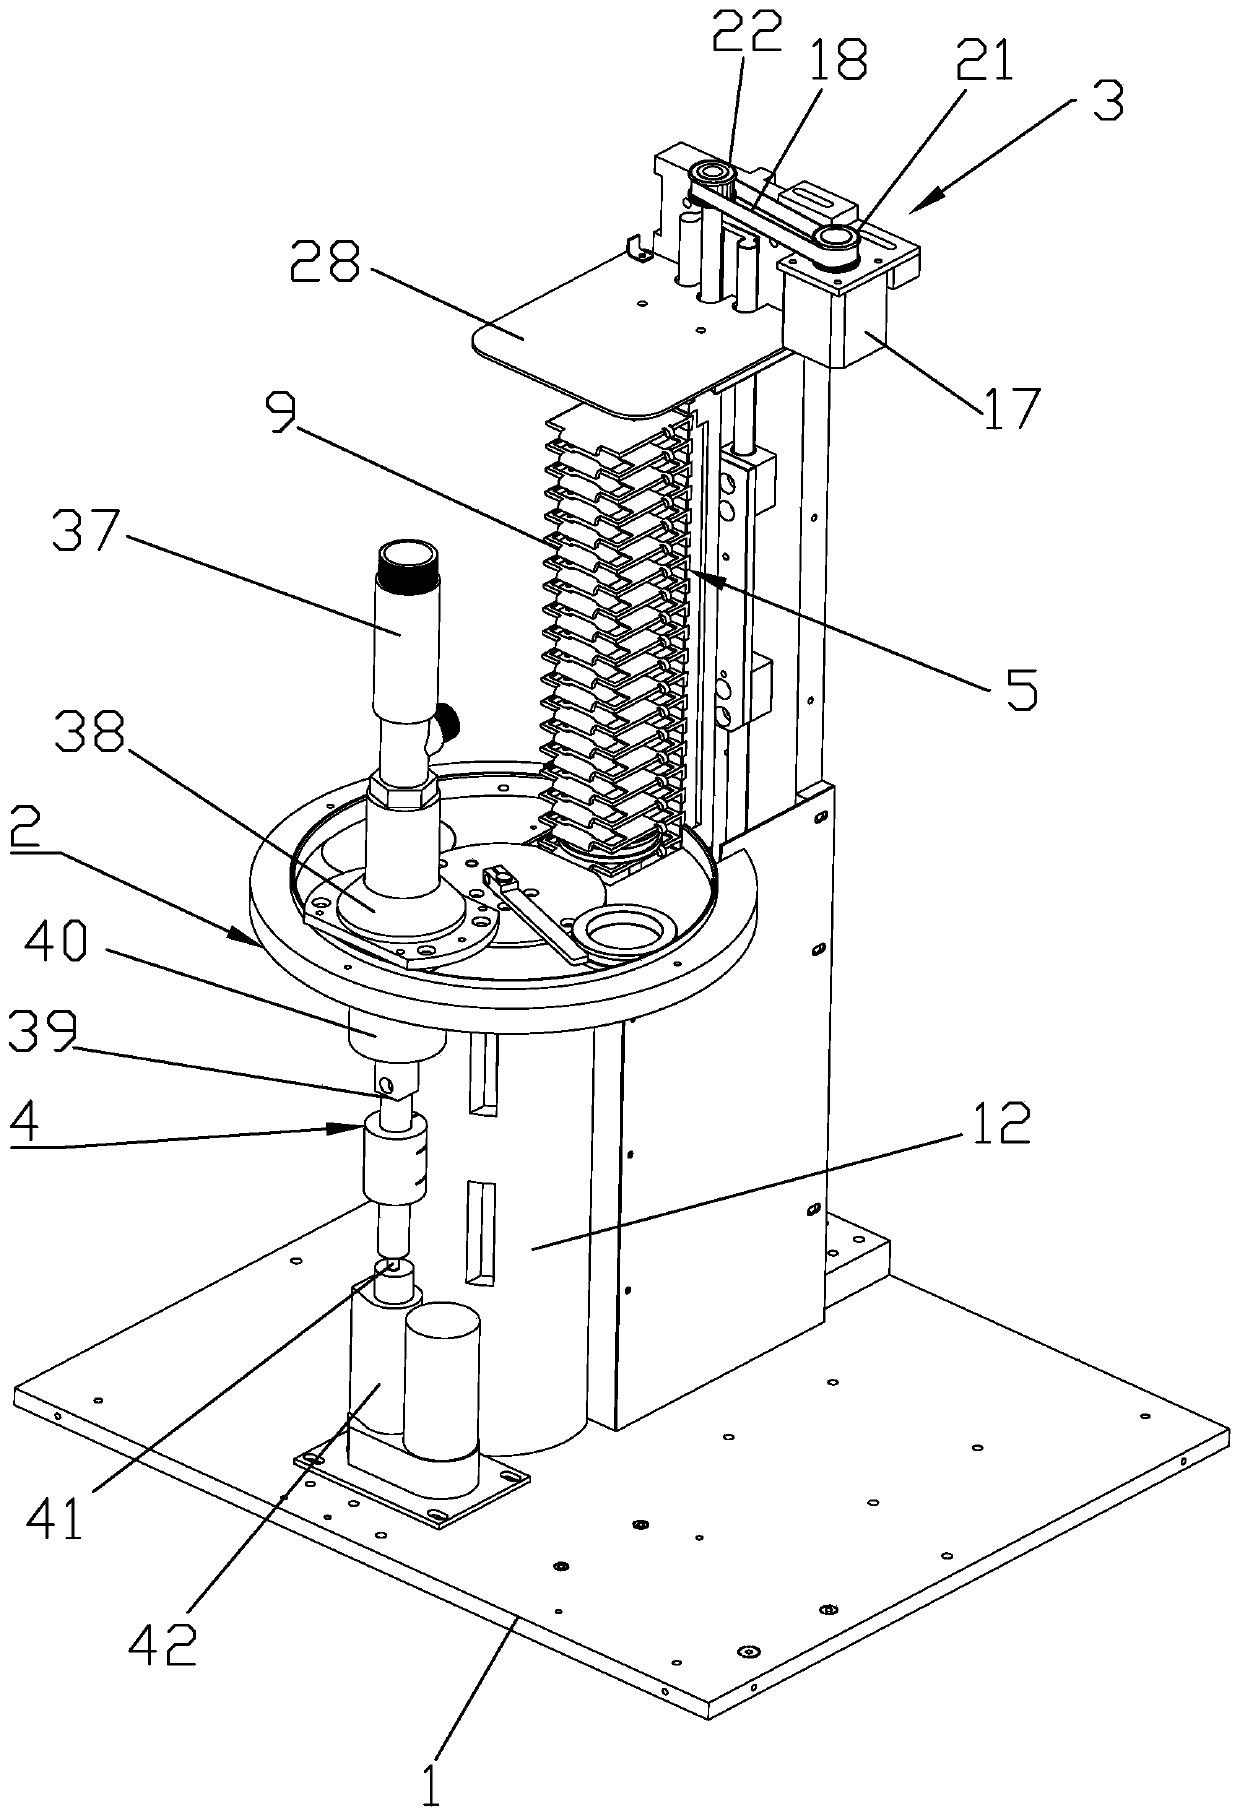 A multi-membrane sampling and weighing device